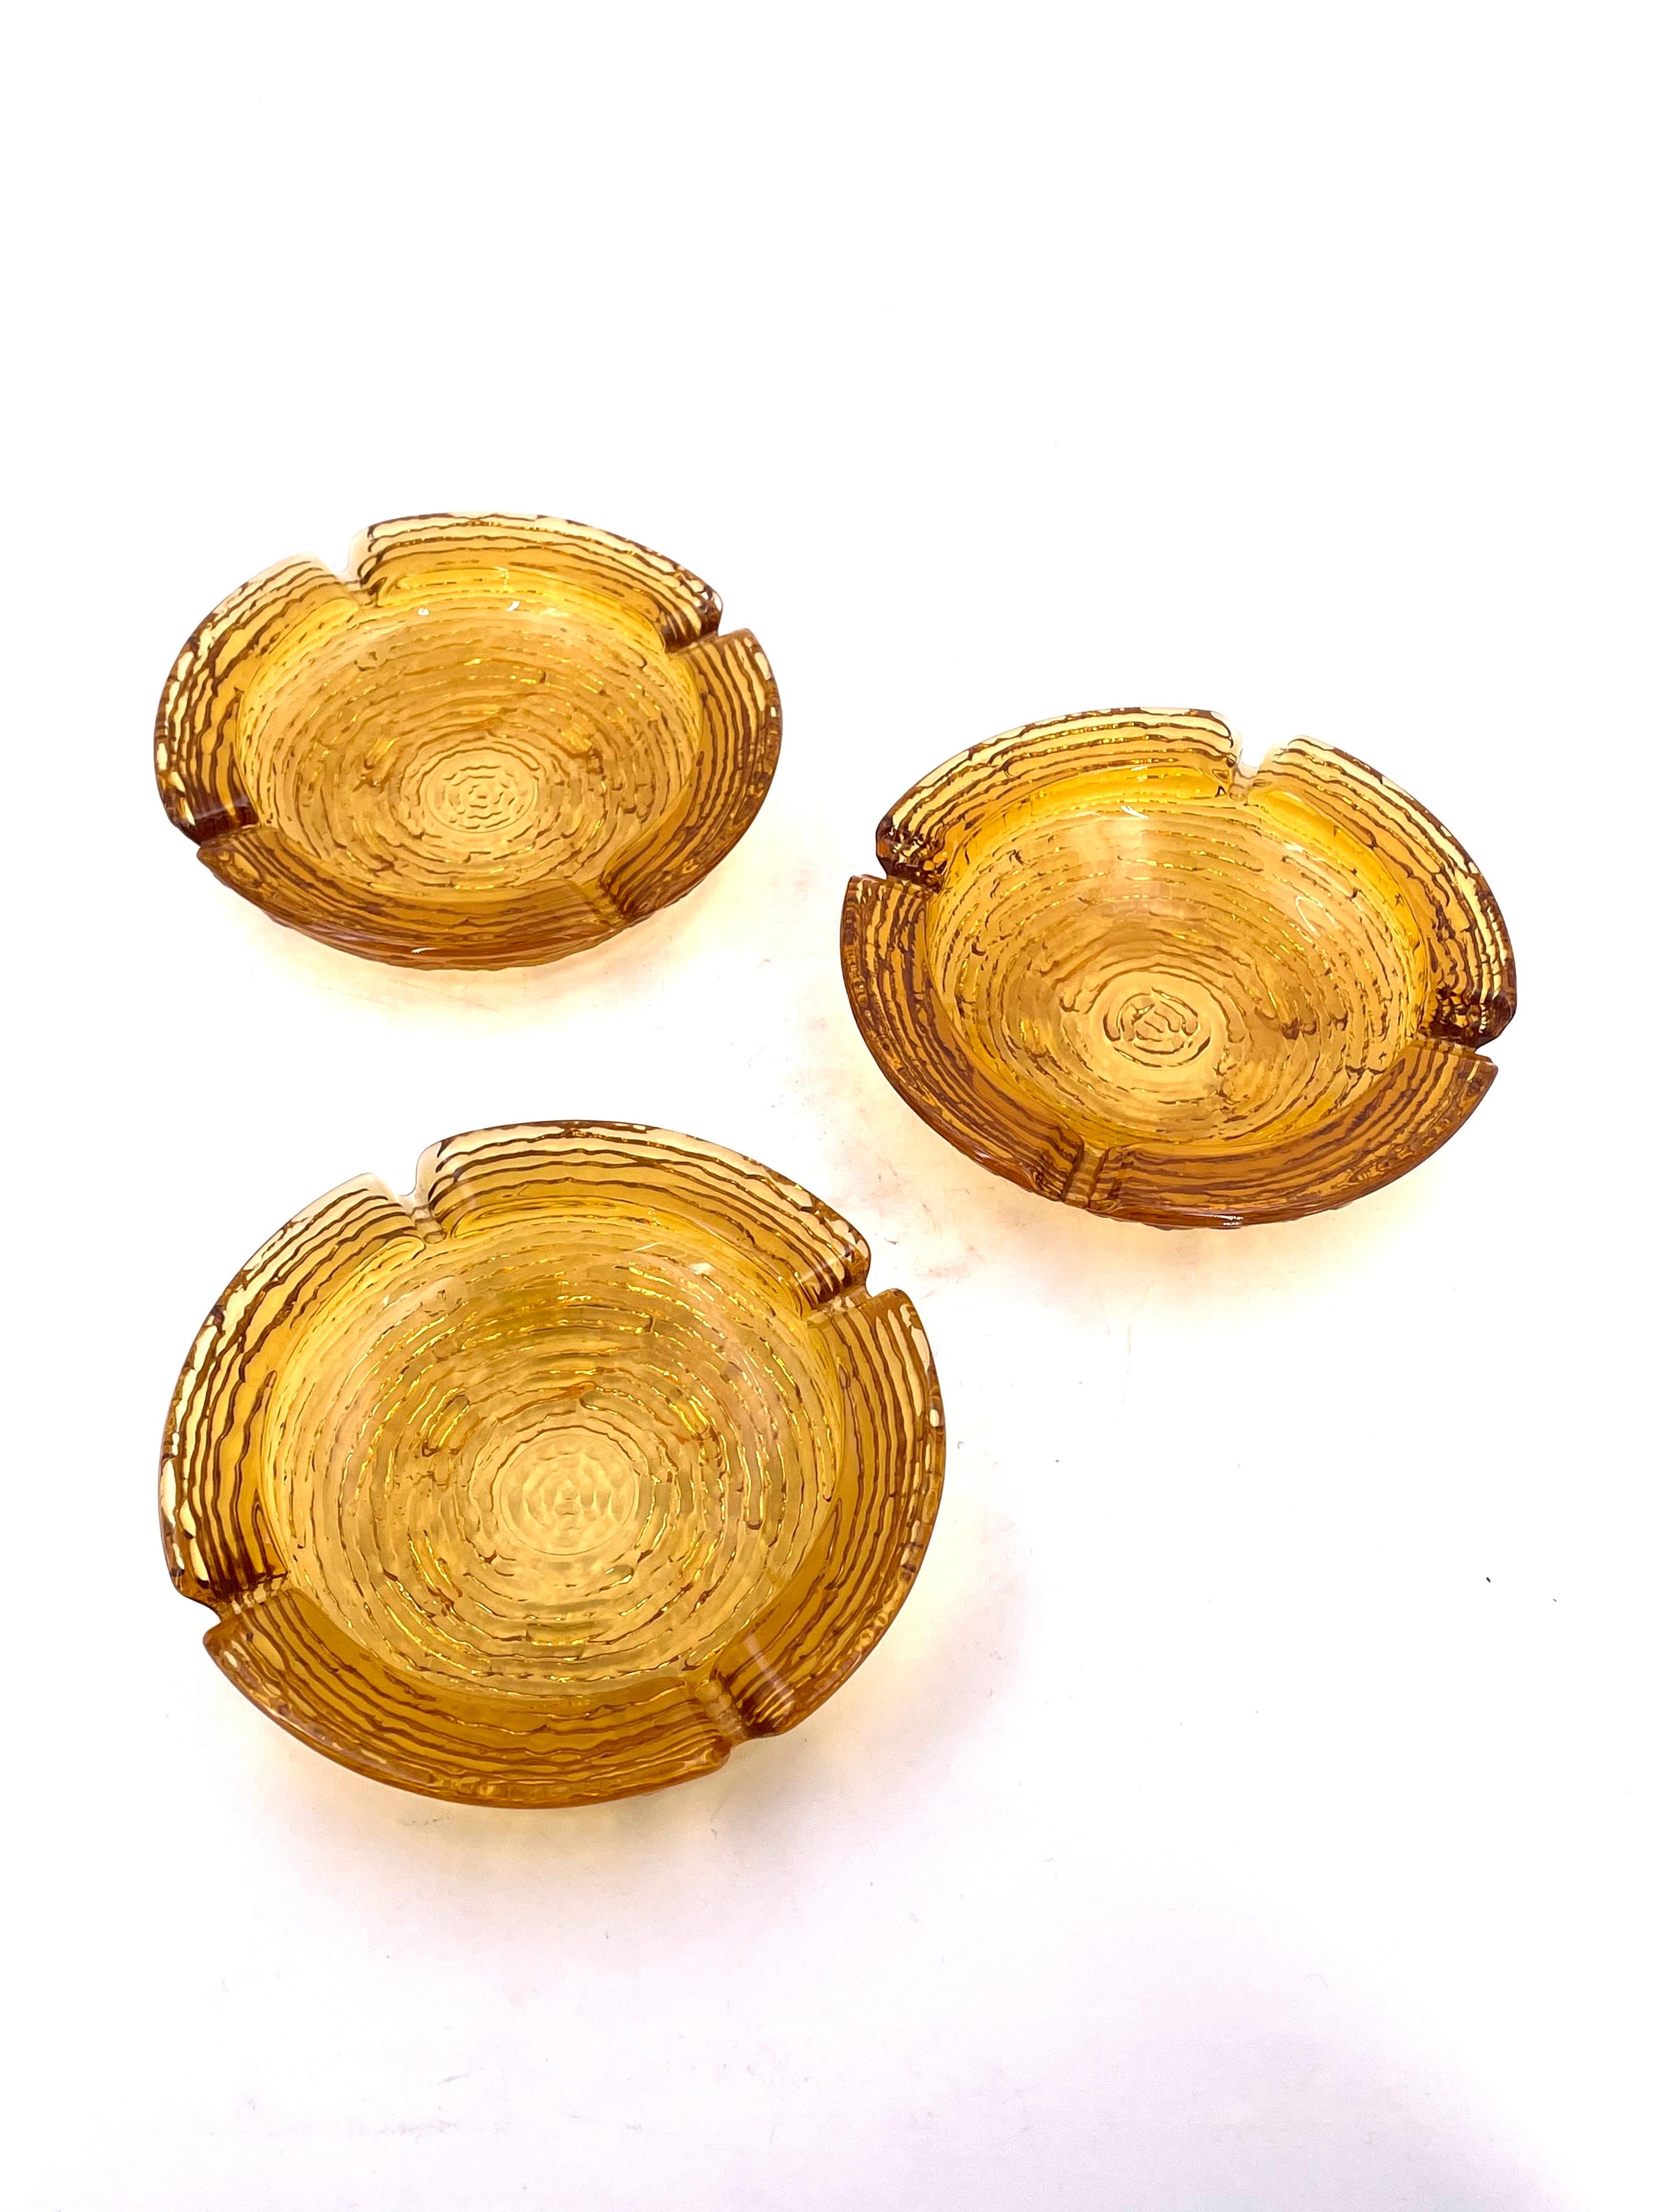 A beautiful trio of textured glass amber color ashtrays, excellent condition no chips or cracks. by Anchor Hocking.